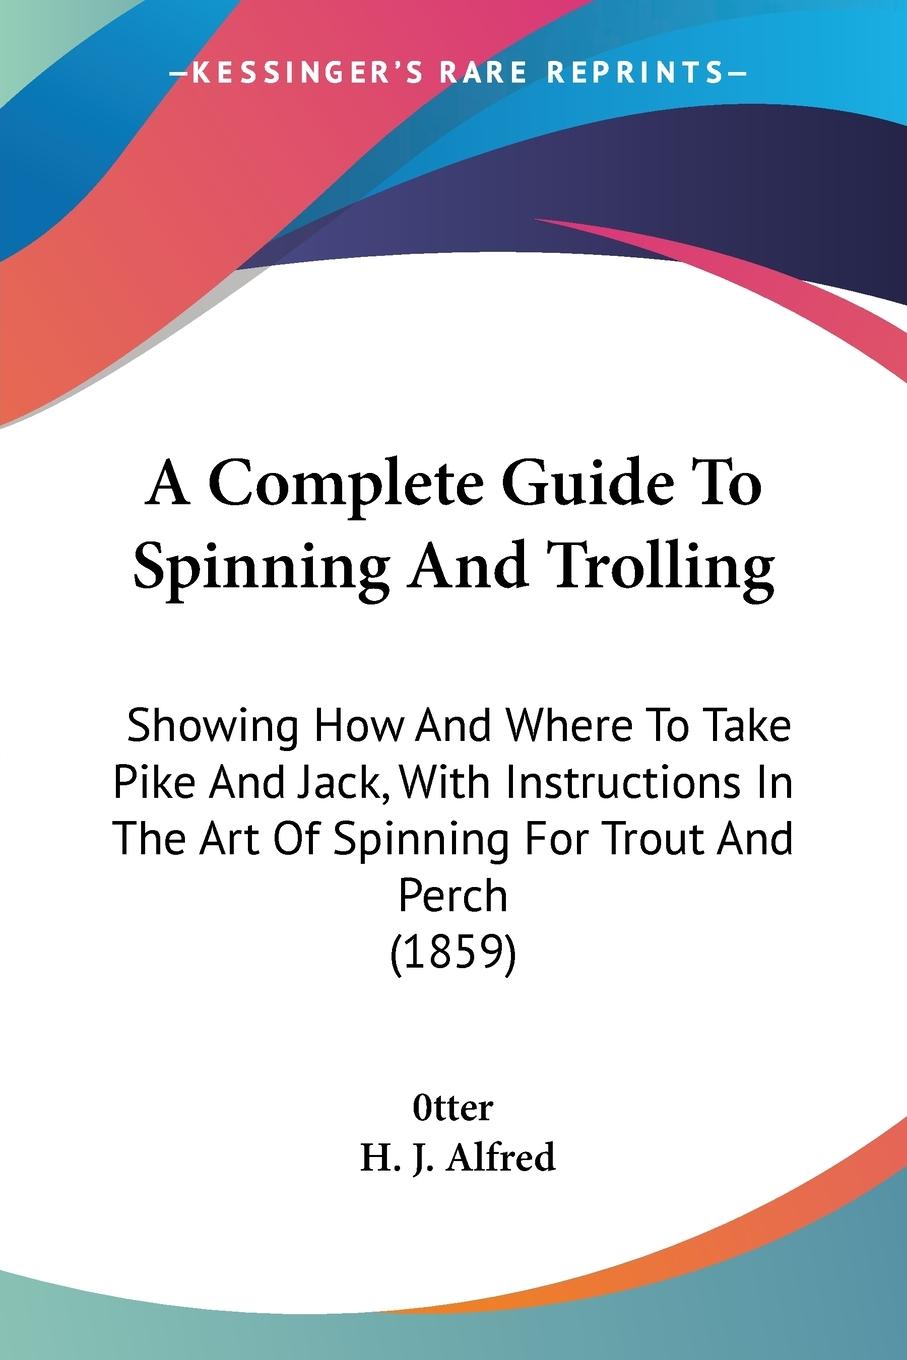 A Complete Guide To Spinning And Trolling - 0tter Alfred, H. J.